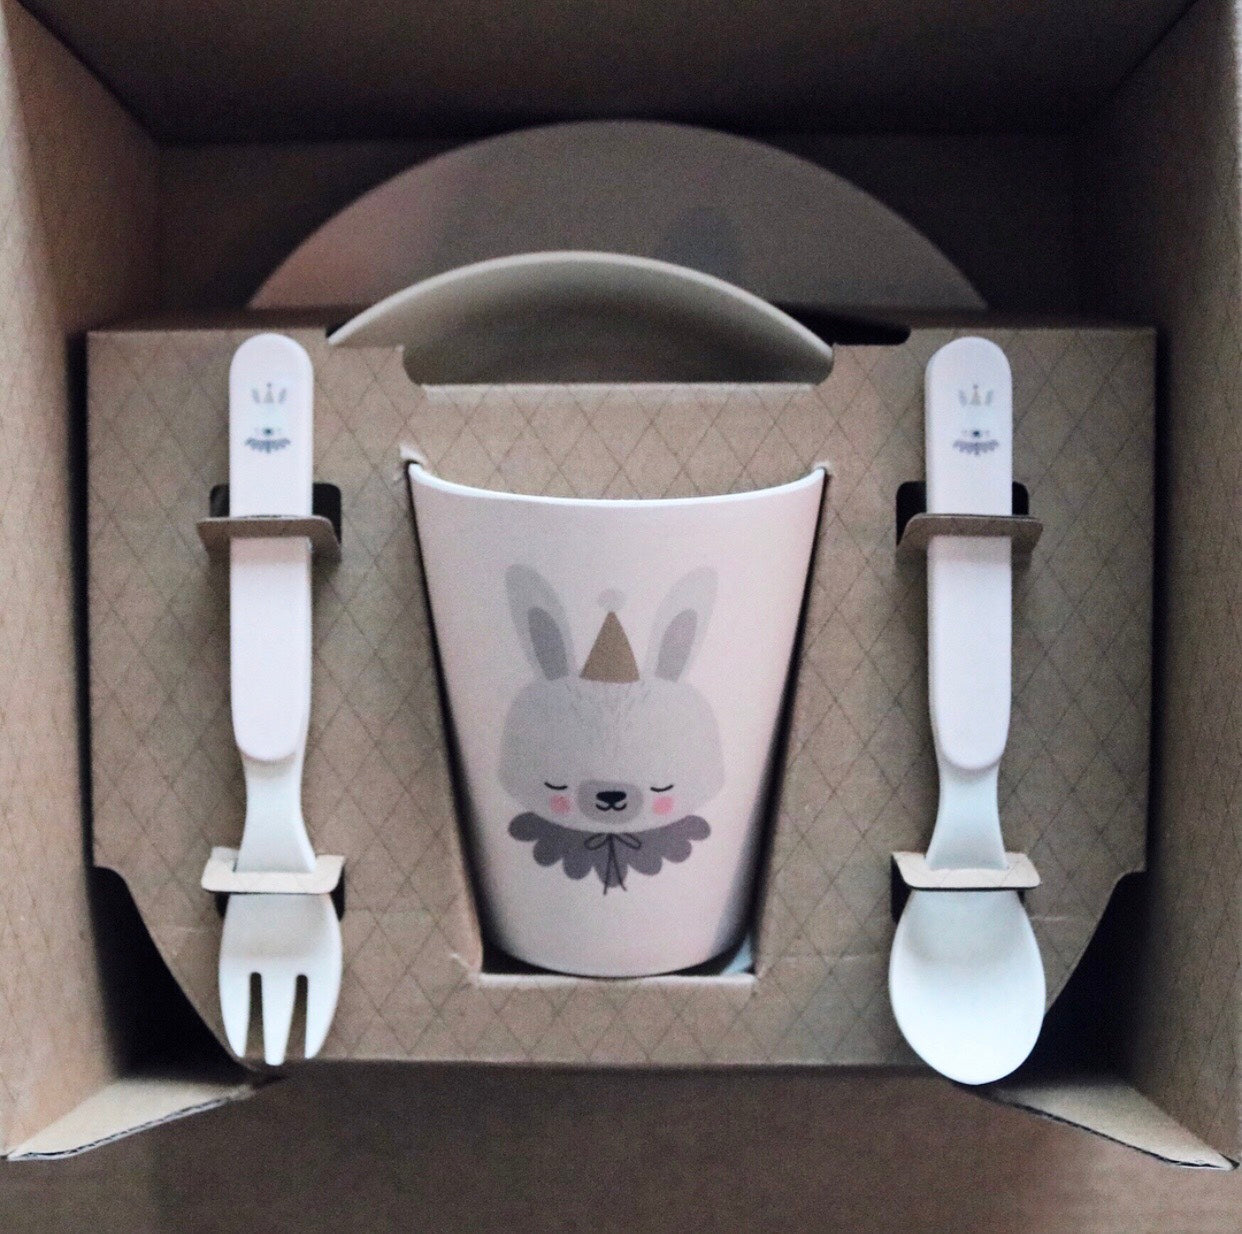 Bamboo Dinner Set - Circus Bunny - ONLY 2 LEFT